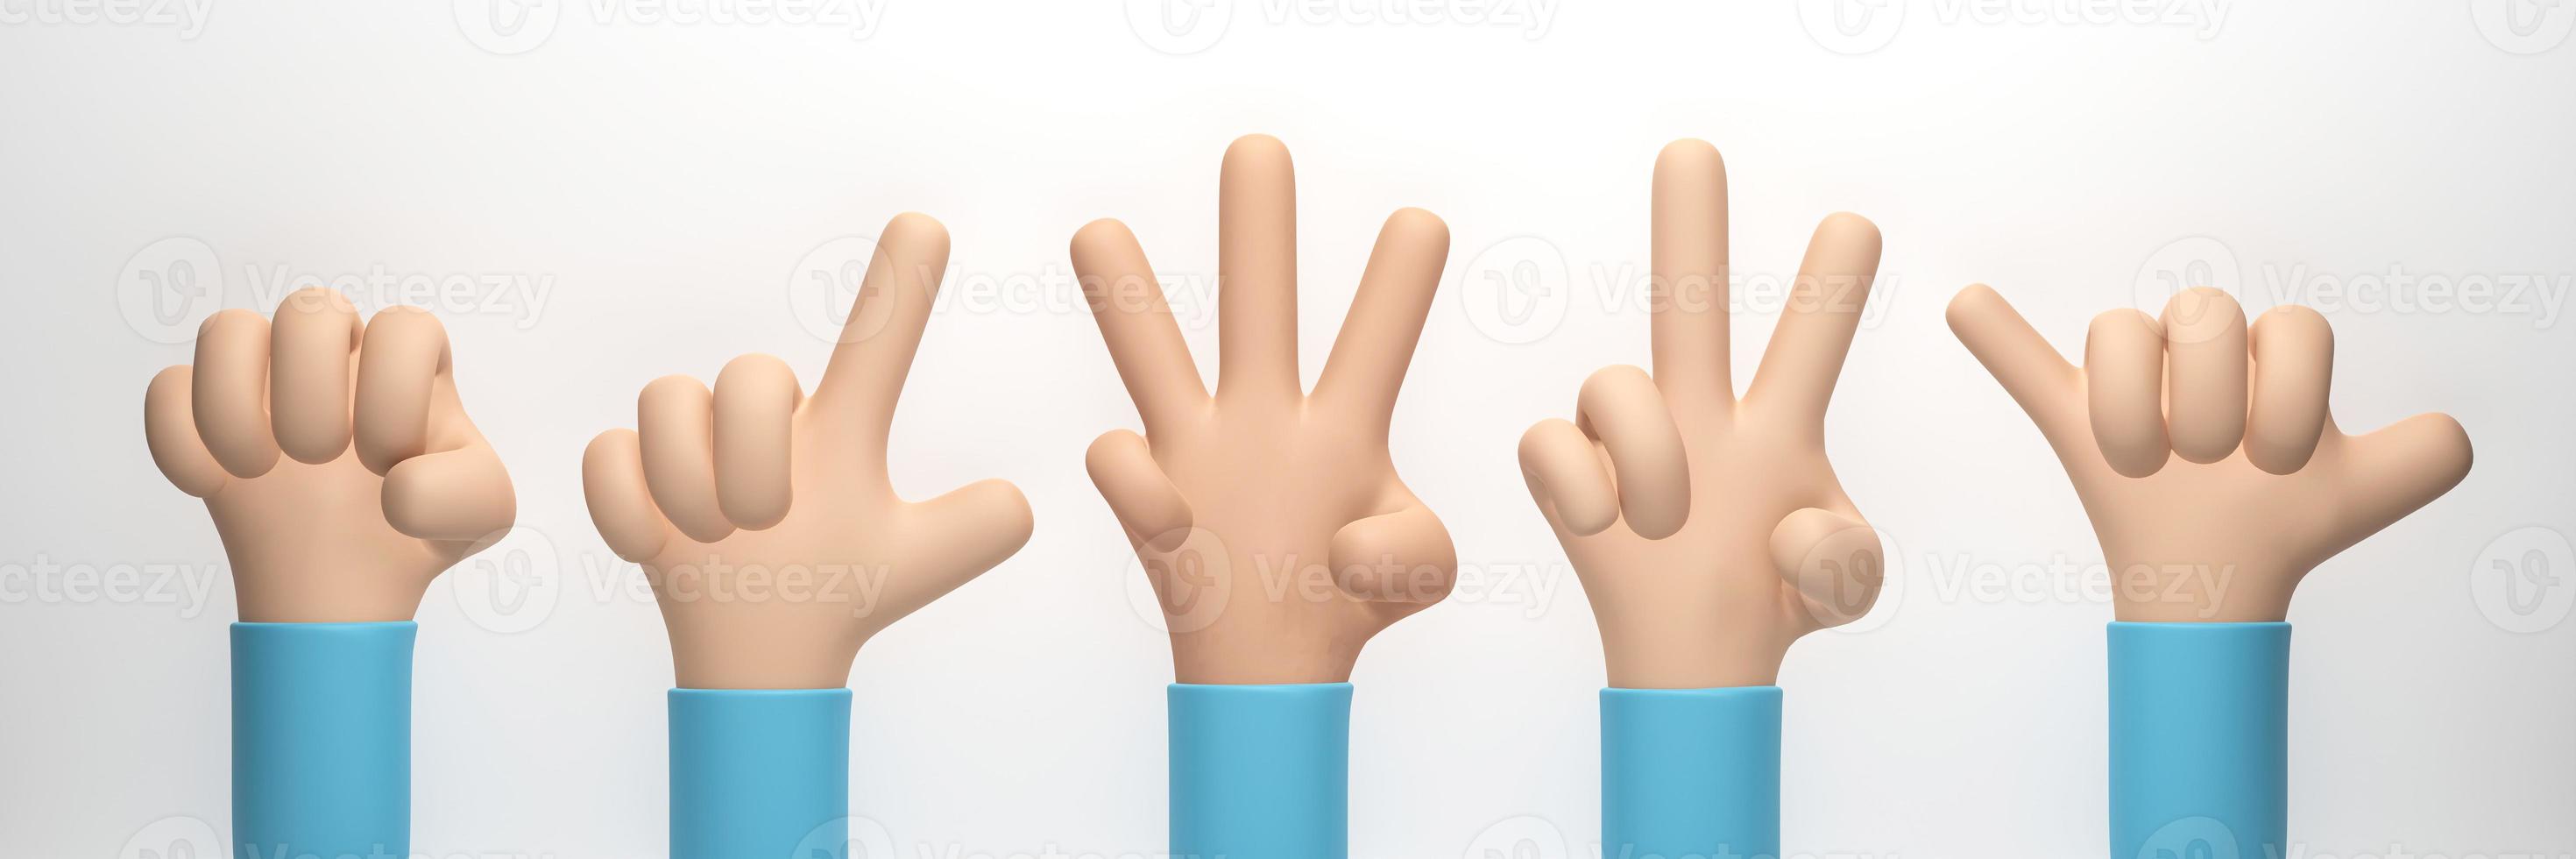 3D rendering, 3D illustration. Hand shows different gestures isolated on white background. simple hands cartoon style photo